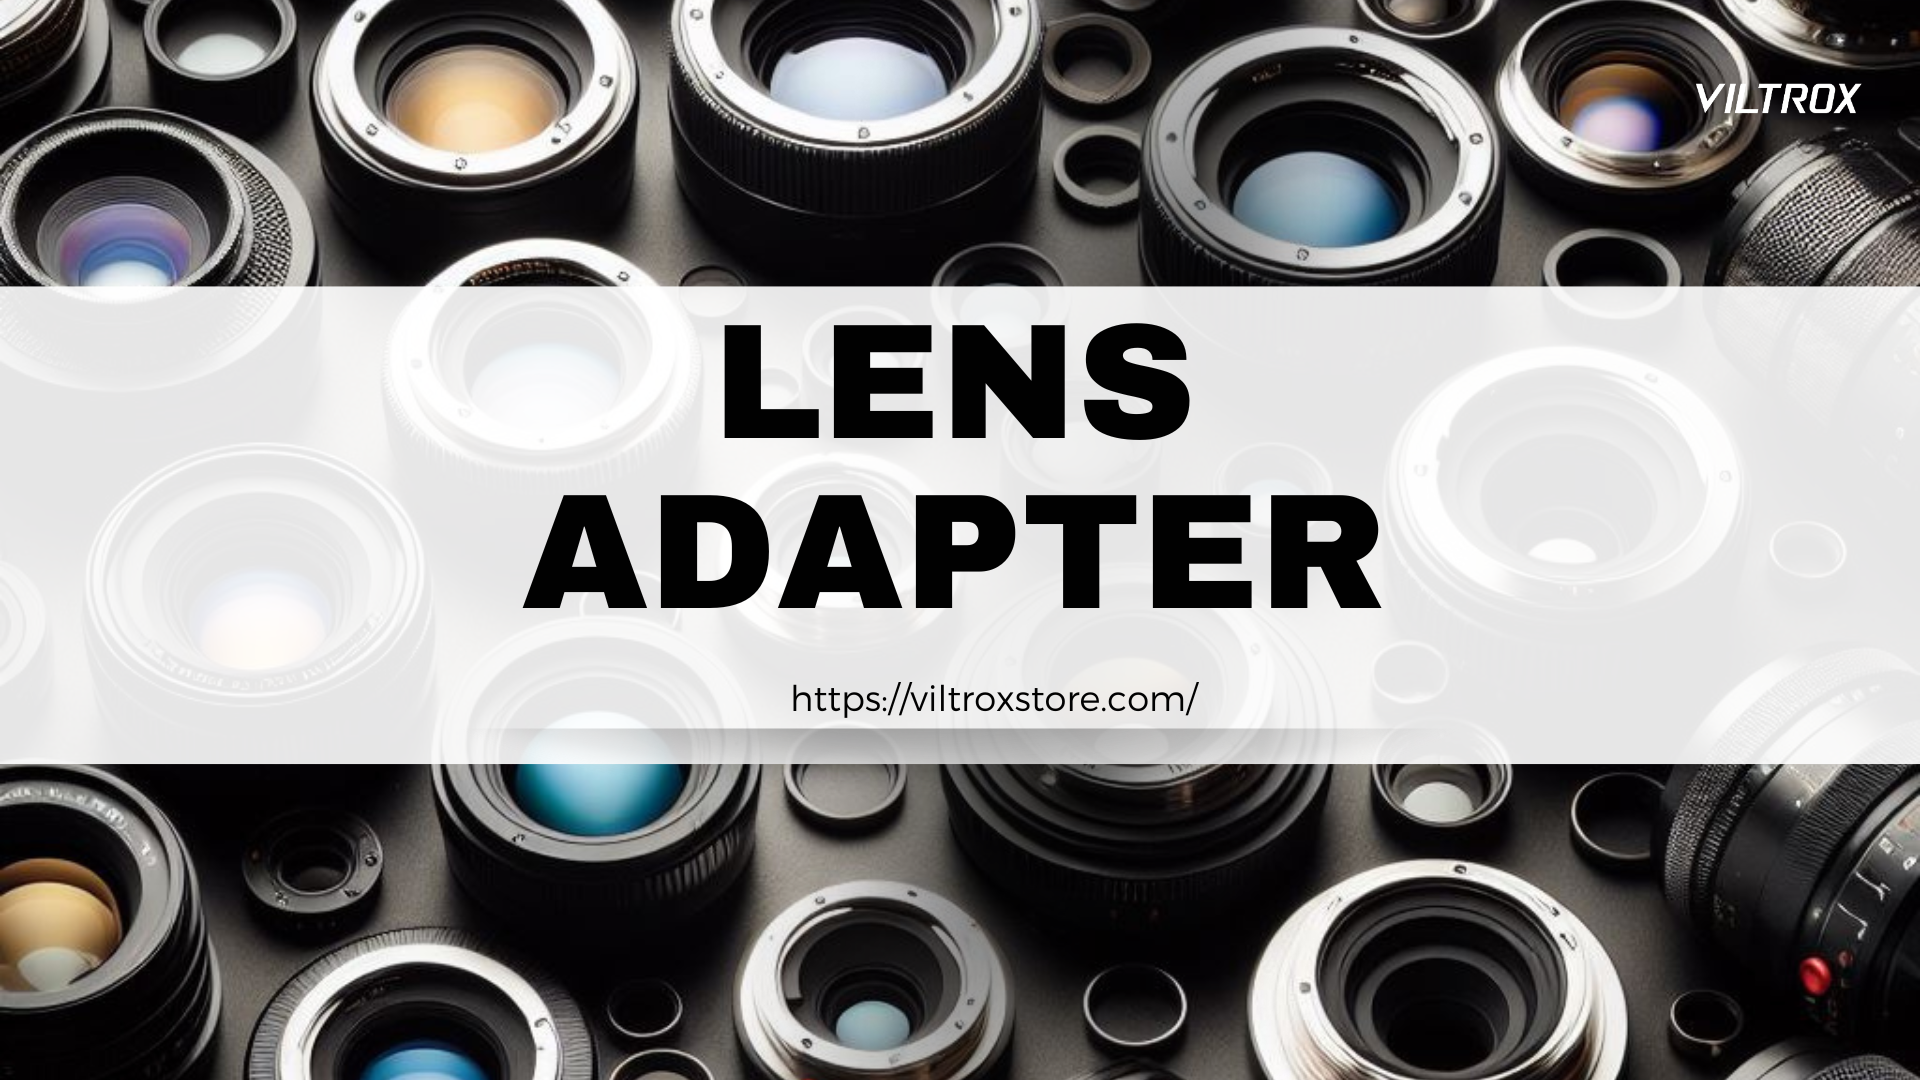 Discovering Photographic Possibilities: A Guide to Viltrox Lens Adapter Rings